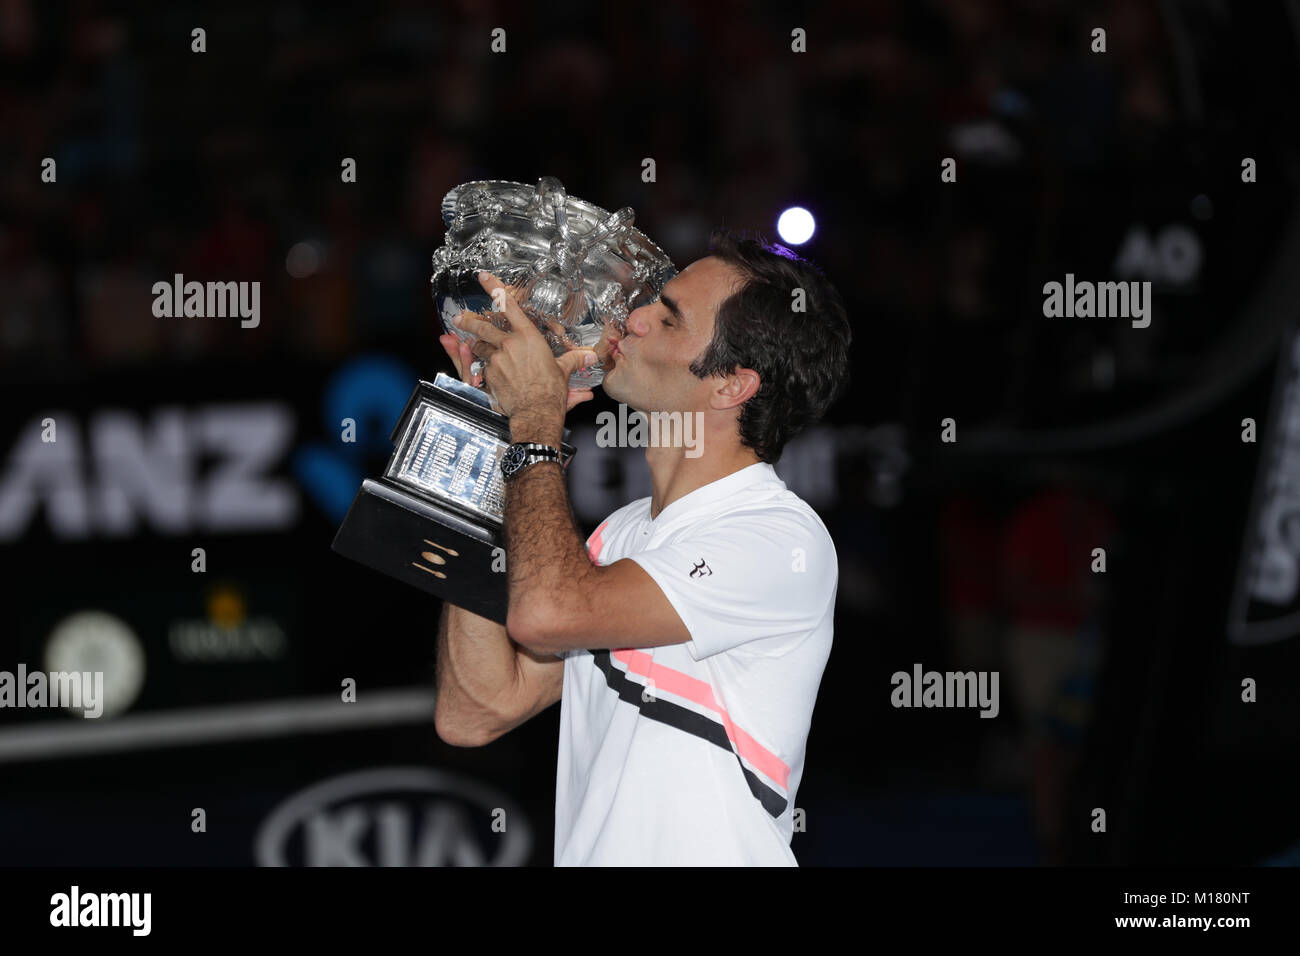 Melbourne, Australia. 28th January 2018. Swiss tennis player Roger Federer is in action during his finals match at the Australian Open vs Bosniac tennis player Marin Cilic on Jan 28, 2018 in Melbourne, Australia.- ©Yan Lerval/Alamy Live News Stock Photo